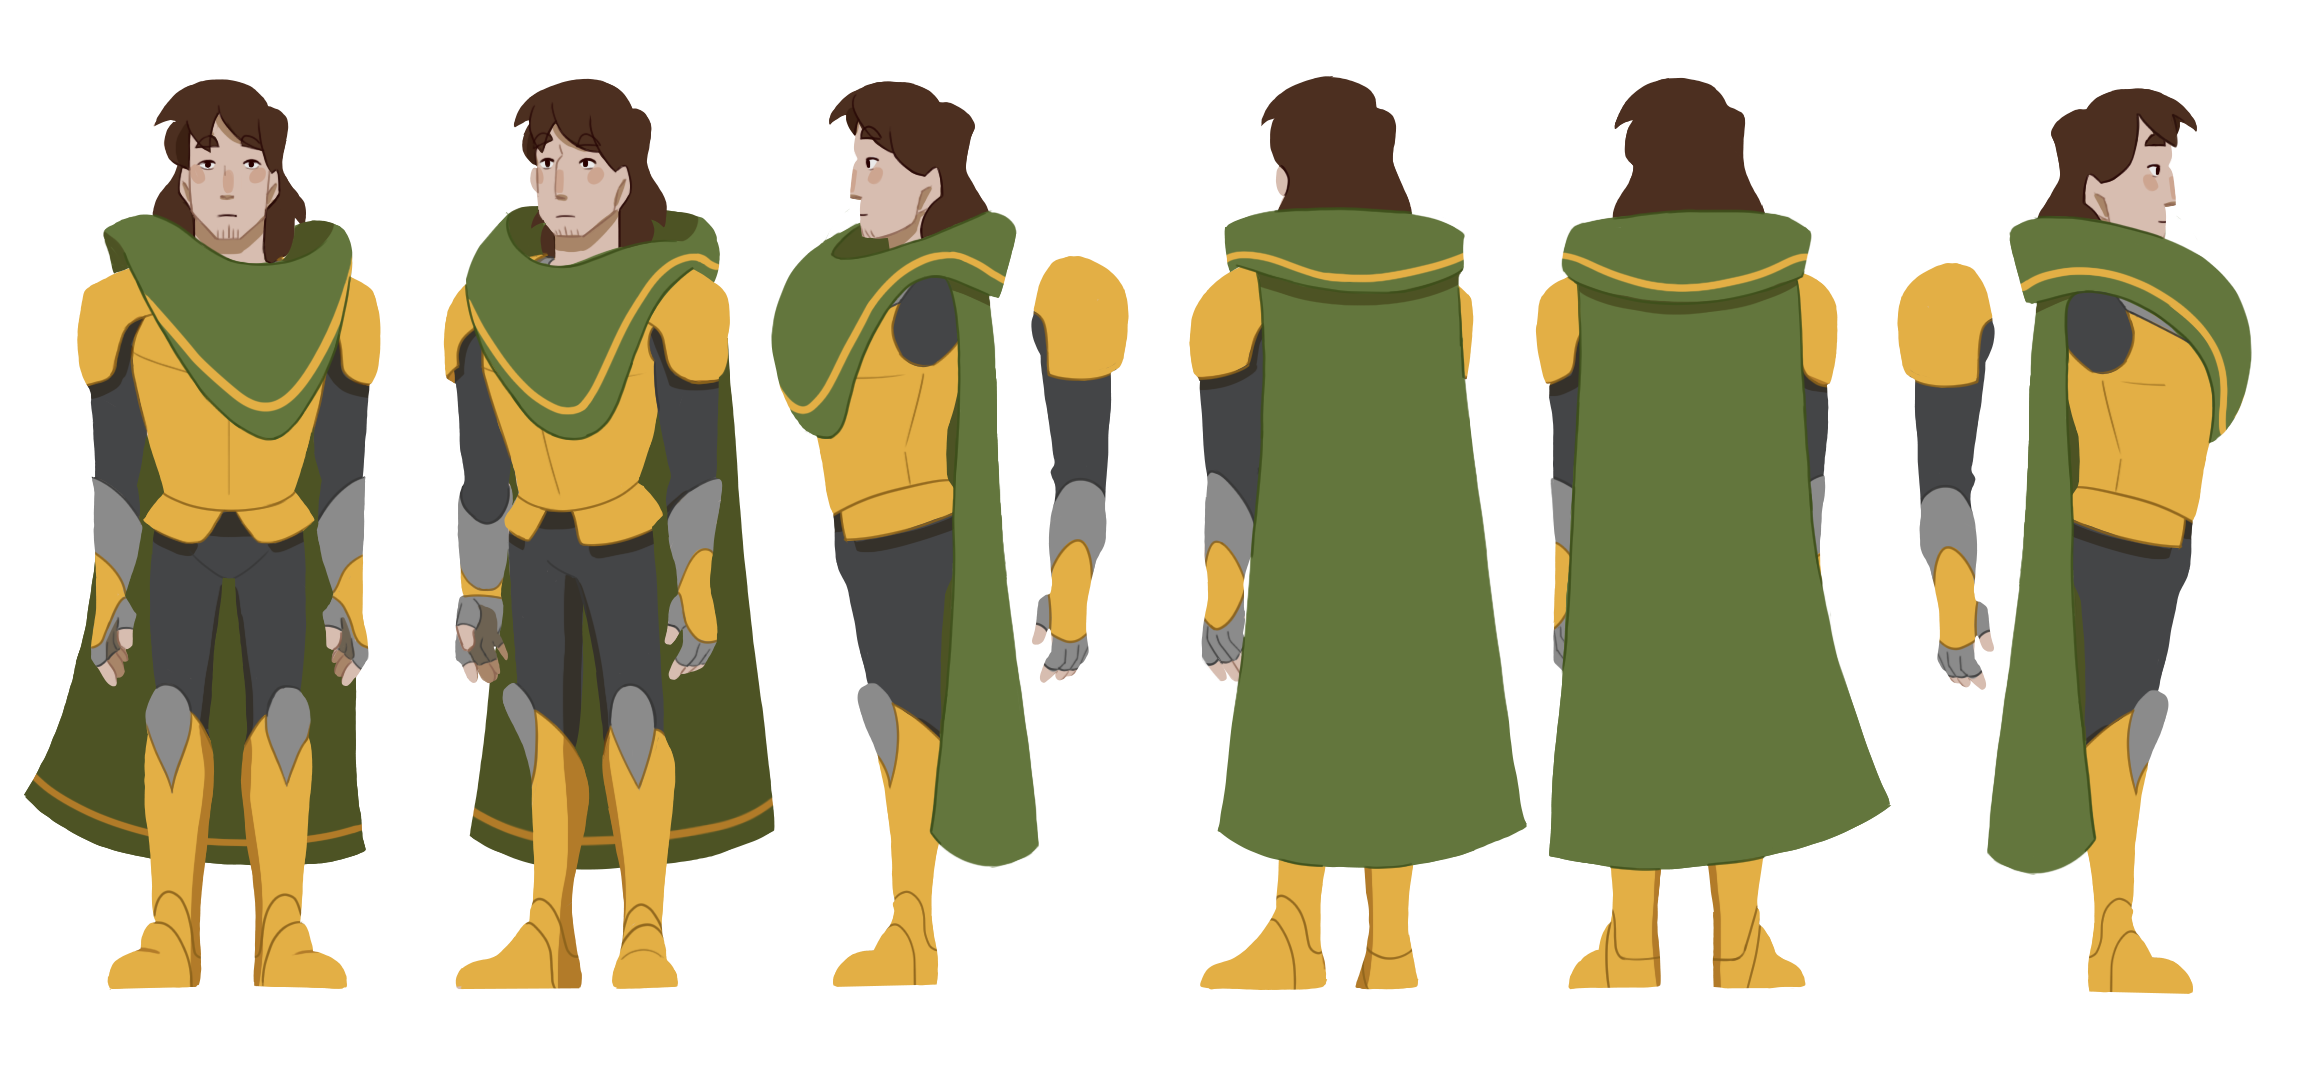 Turnaround of the character of Elias, a medieval knight. He hair fair skin, shoulder length brown hair, and a gold and grey armor. He also wears a green cape.